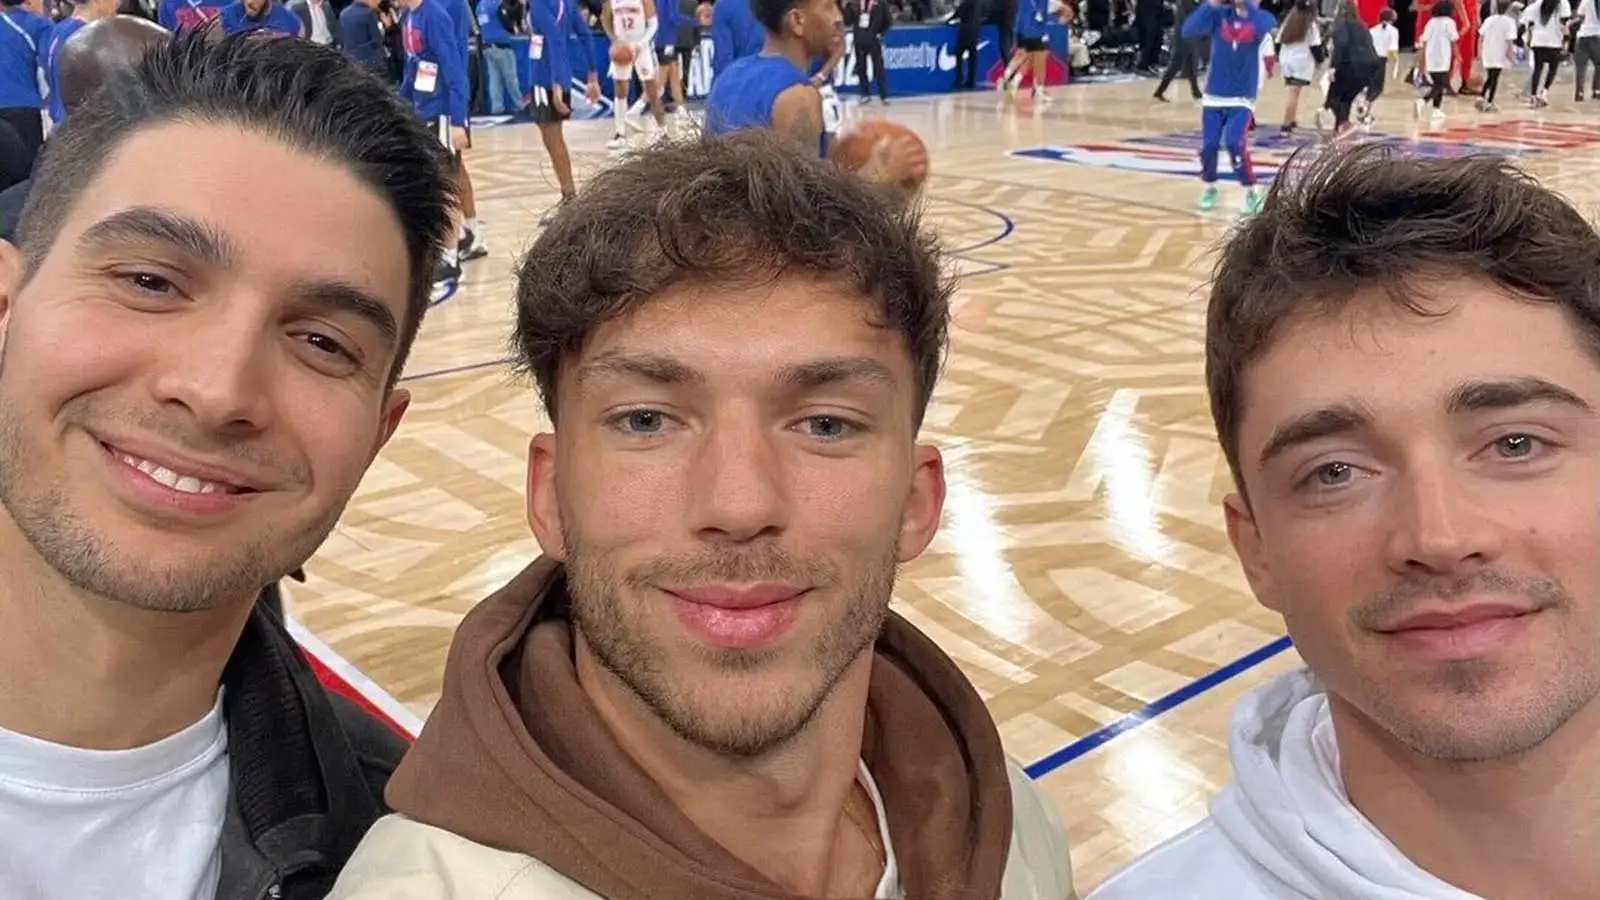 Charles Leclerc, Pierre Gasly and 2 fans at the Bucks' game last